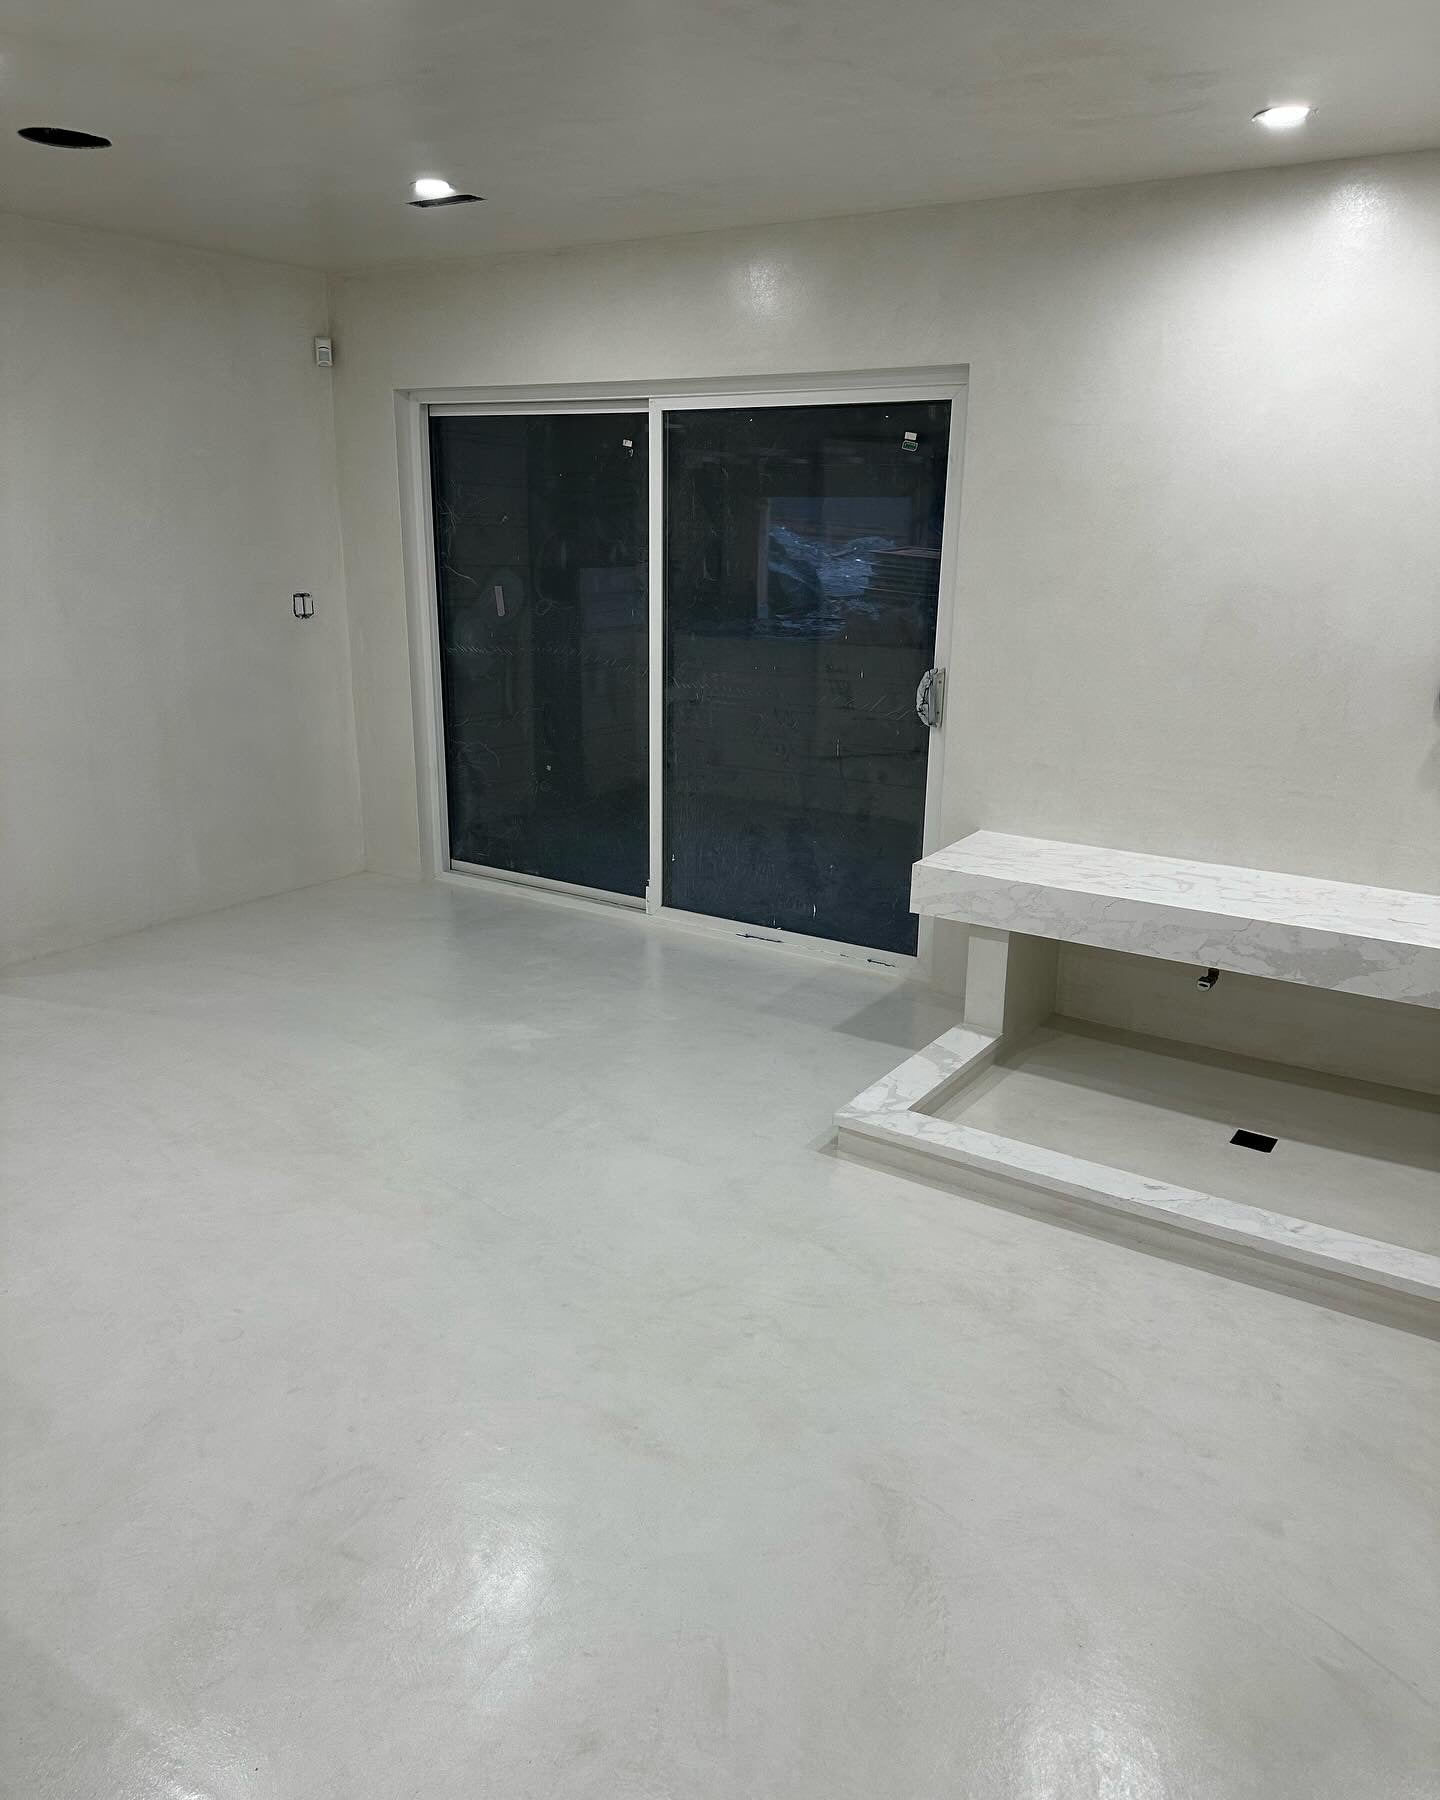 Microcement Floor - 5 Star Finishes Ltd